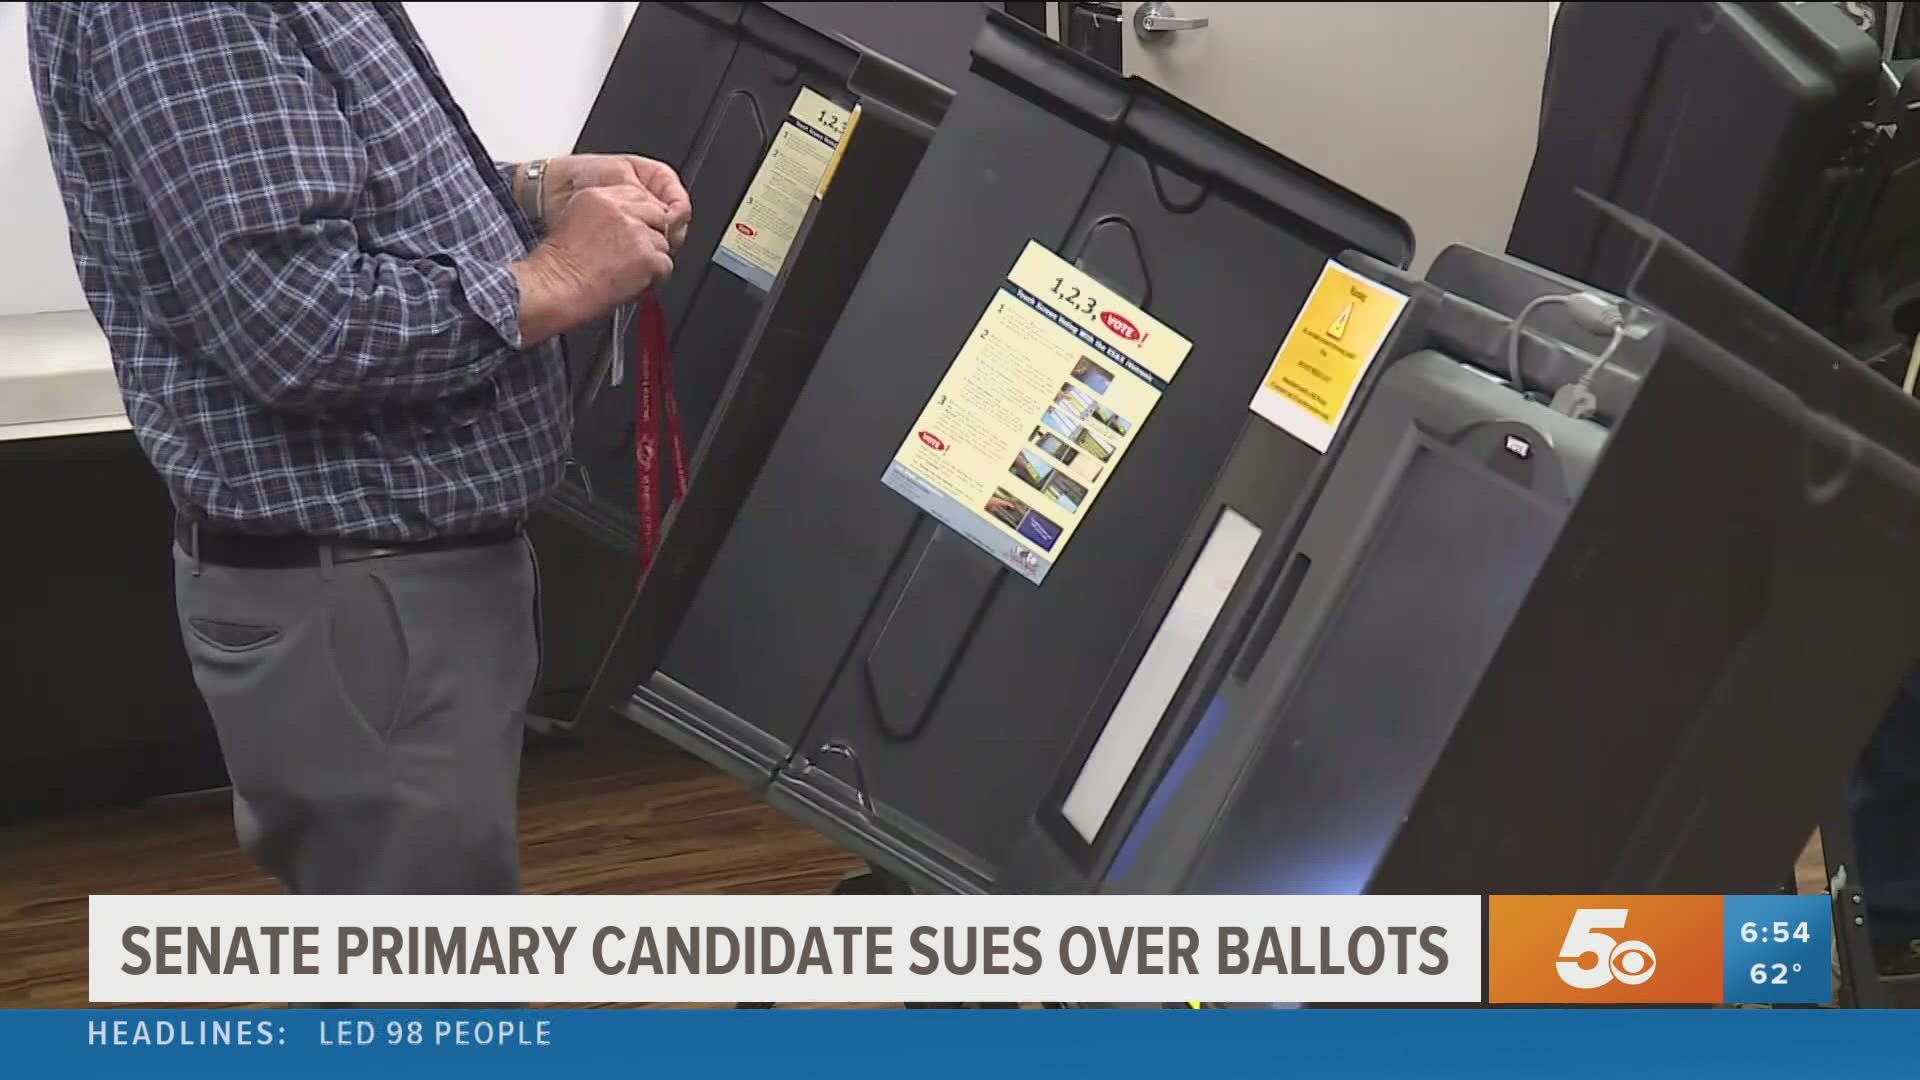 Jake Bequette is suing after two counties incorrectly listed his first name as “Jack" on their ballots in this month's Republican primary election.